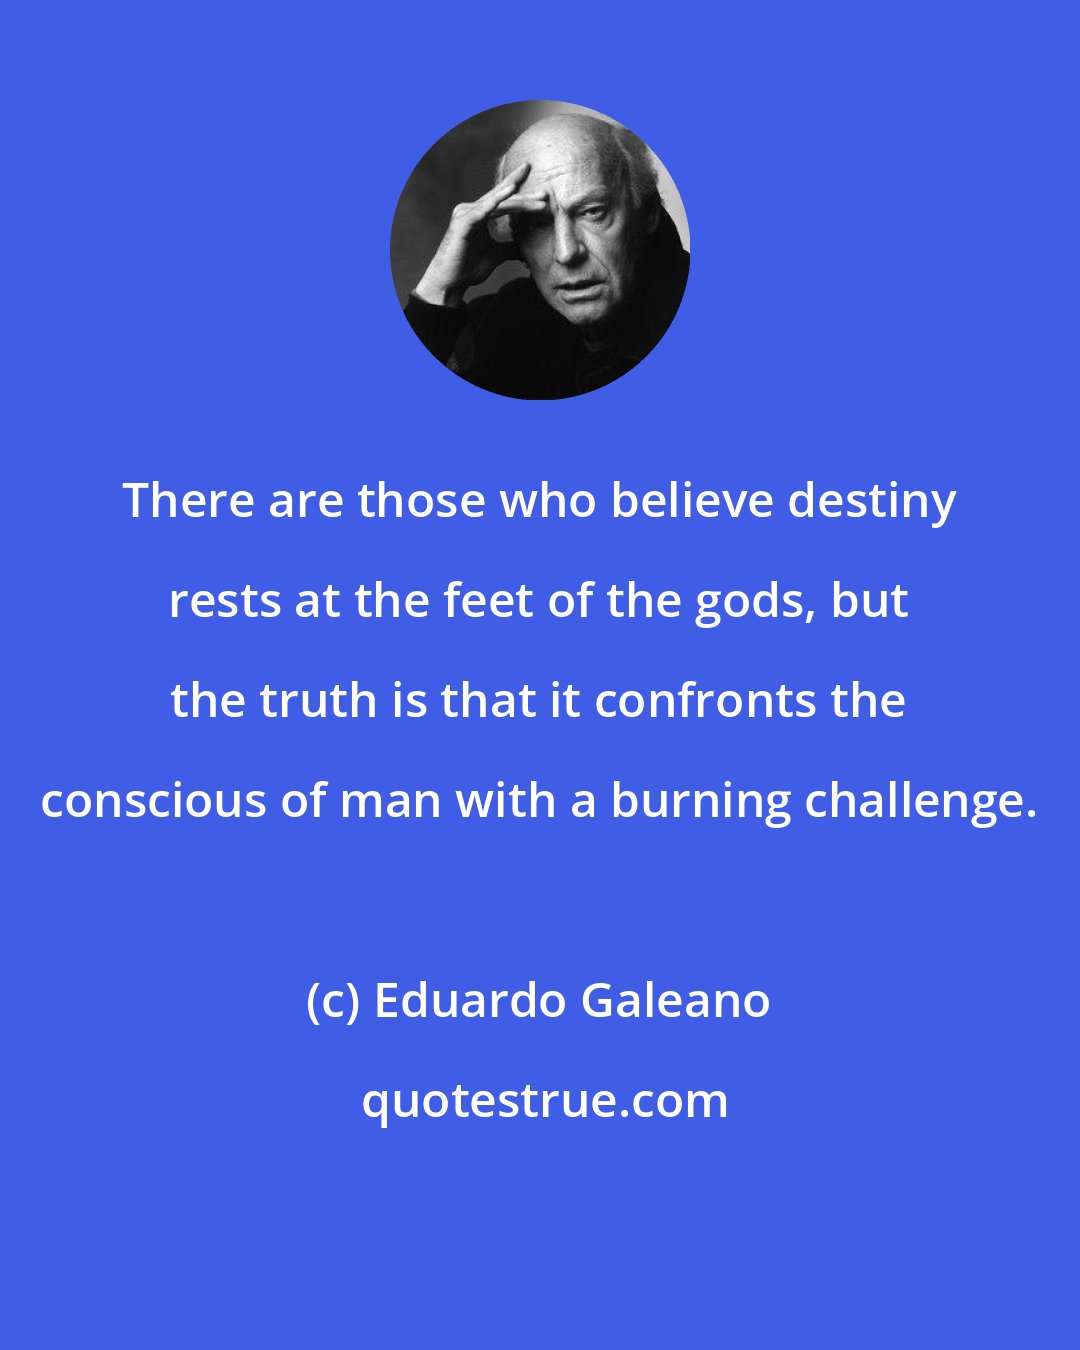 Eduardo Galeano: There are those who believe destiny rests at the feet of the gods, but the truth is that it confronts the conscious of man with a burning challenge.